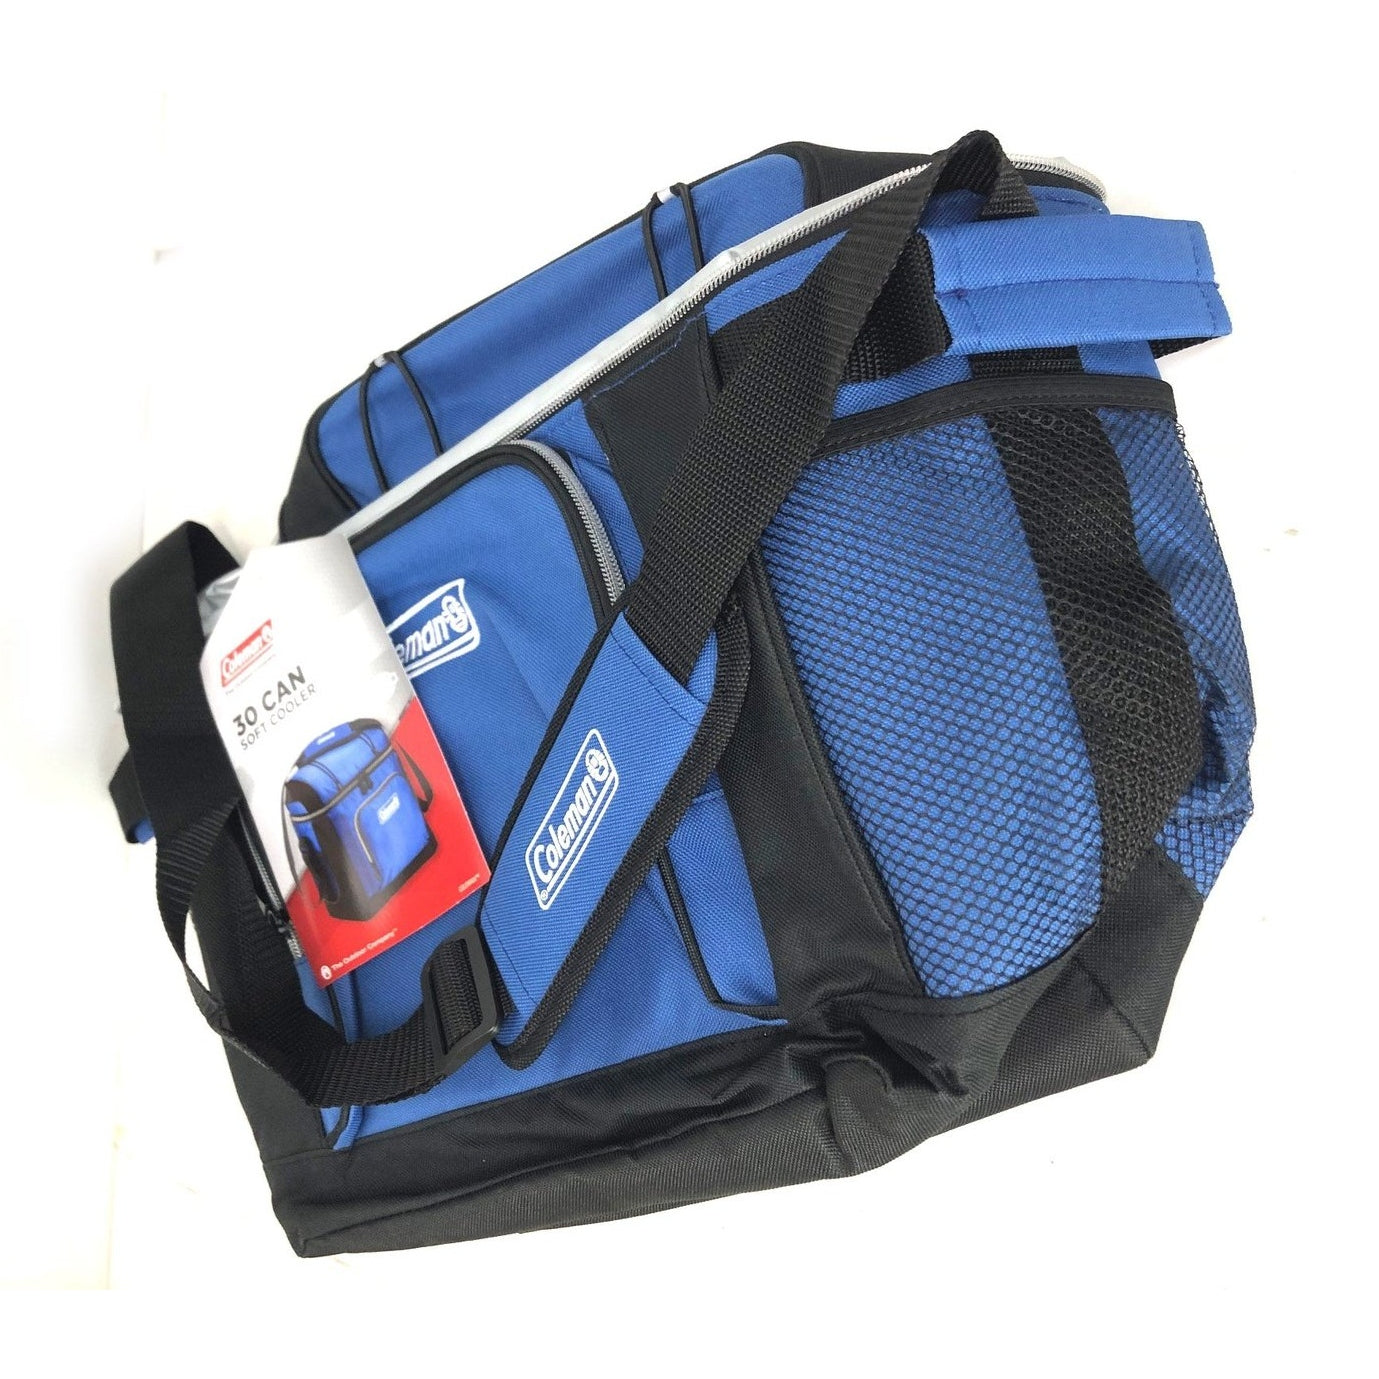 Cooler Bag Coleman 30 Can Soft Cool Bag Insulated Camping Picnic